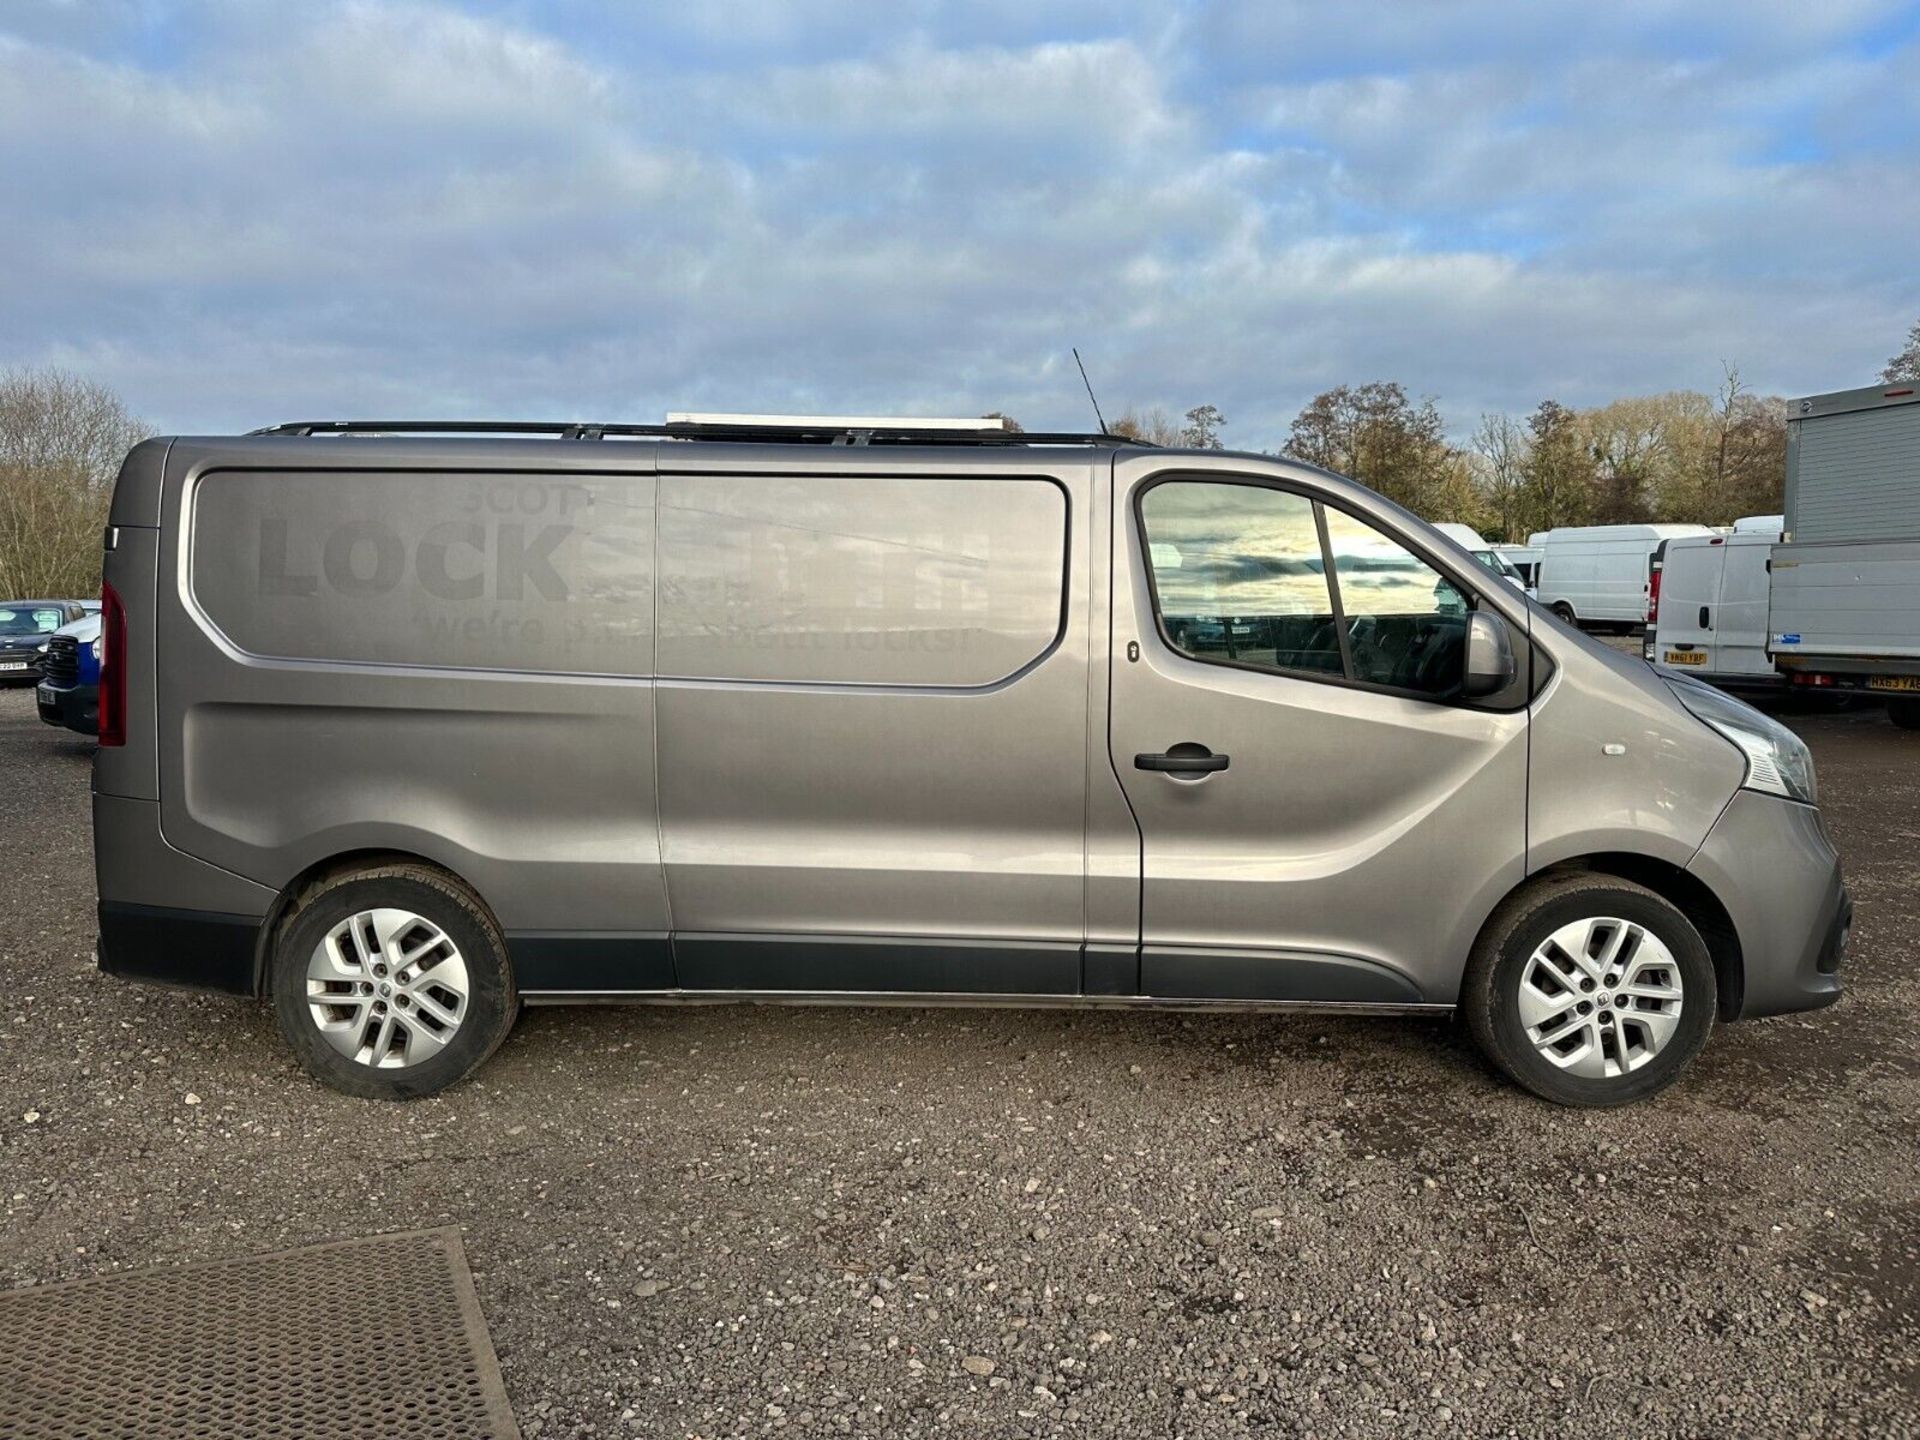 >>--NO VAT ON HAMMER--<< RENAULT TRAFIC REVIVAL: CLEAN BODY, INTERIOR - REPAIR OPPORTUNITY - Image 15 of 16